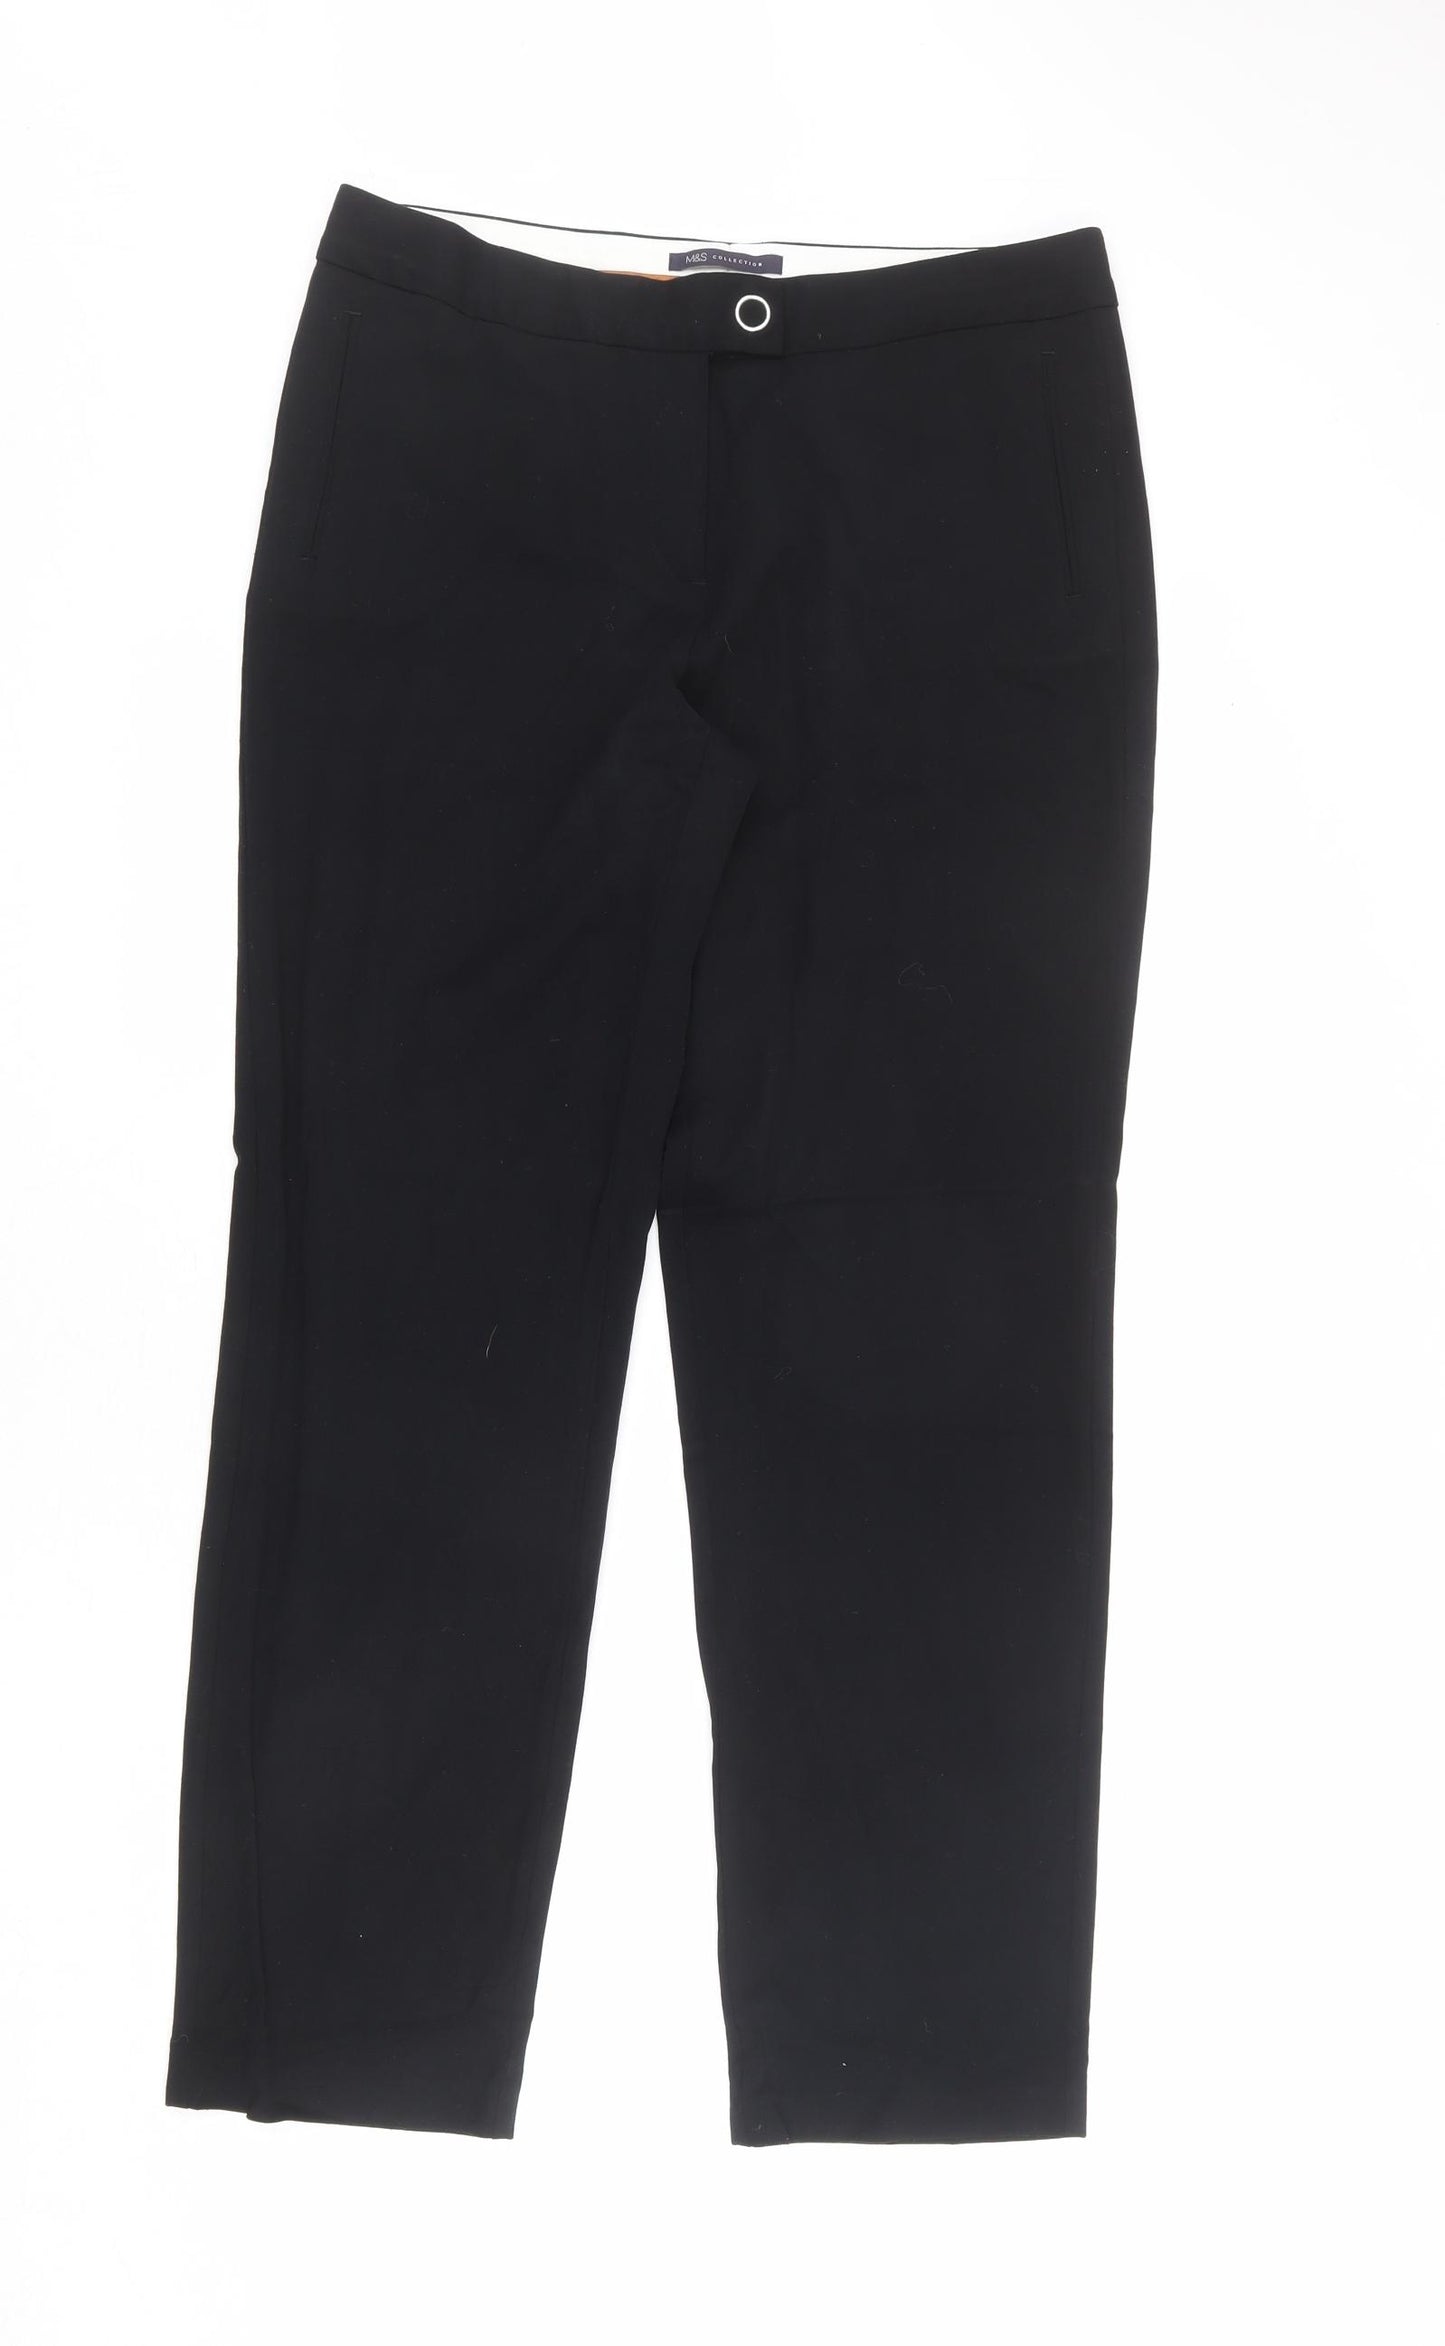 Marks and Spencer Womens Black Viscose Dress Pants Trousers Size 14 L30 in Regular Zip